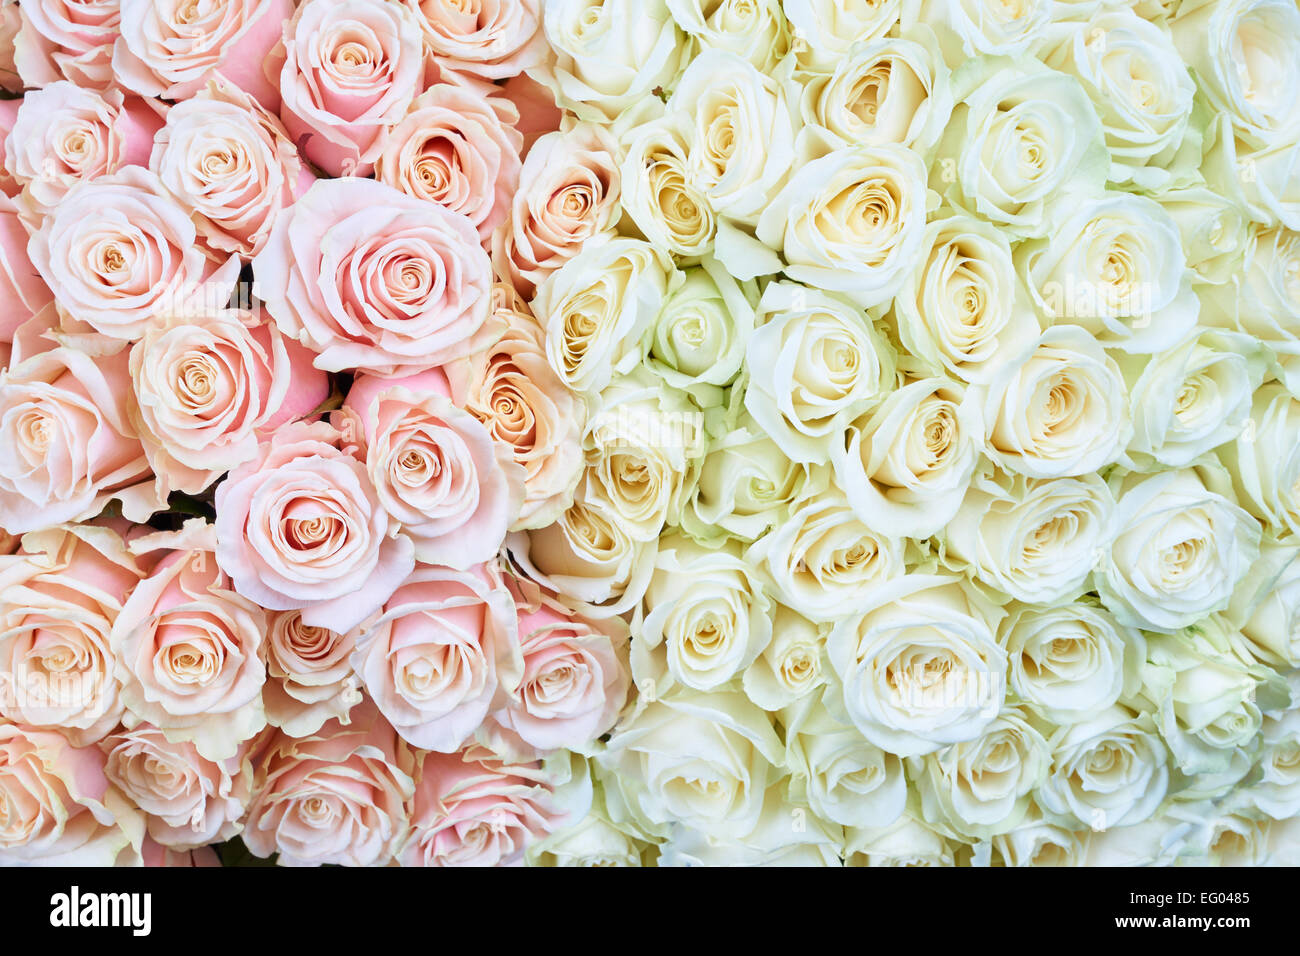 Bunch of pink and white roses as a floral background Stock Photo